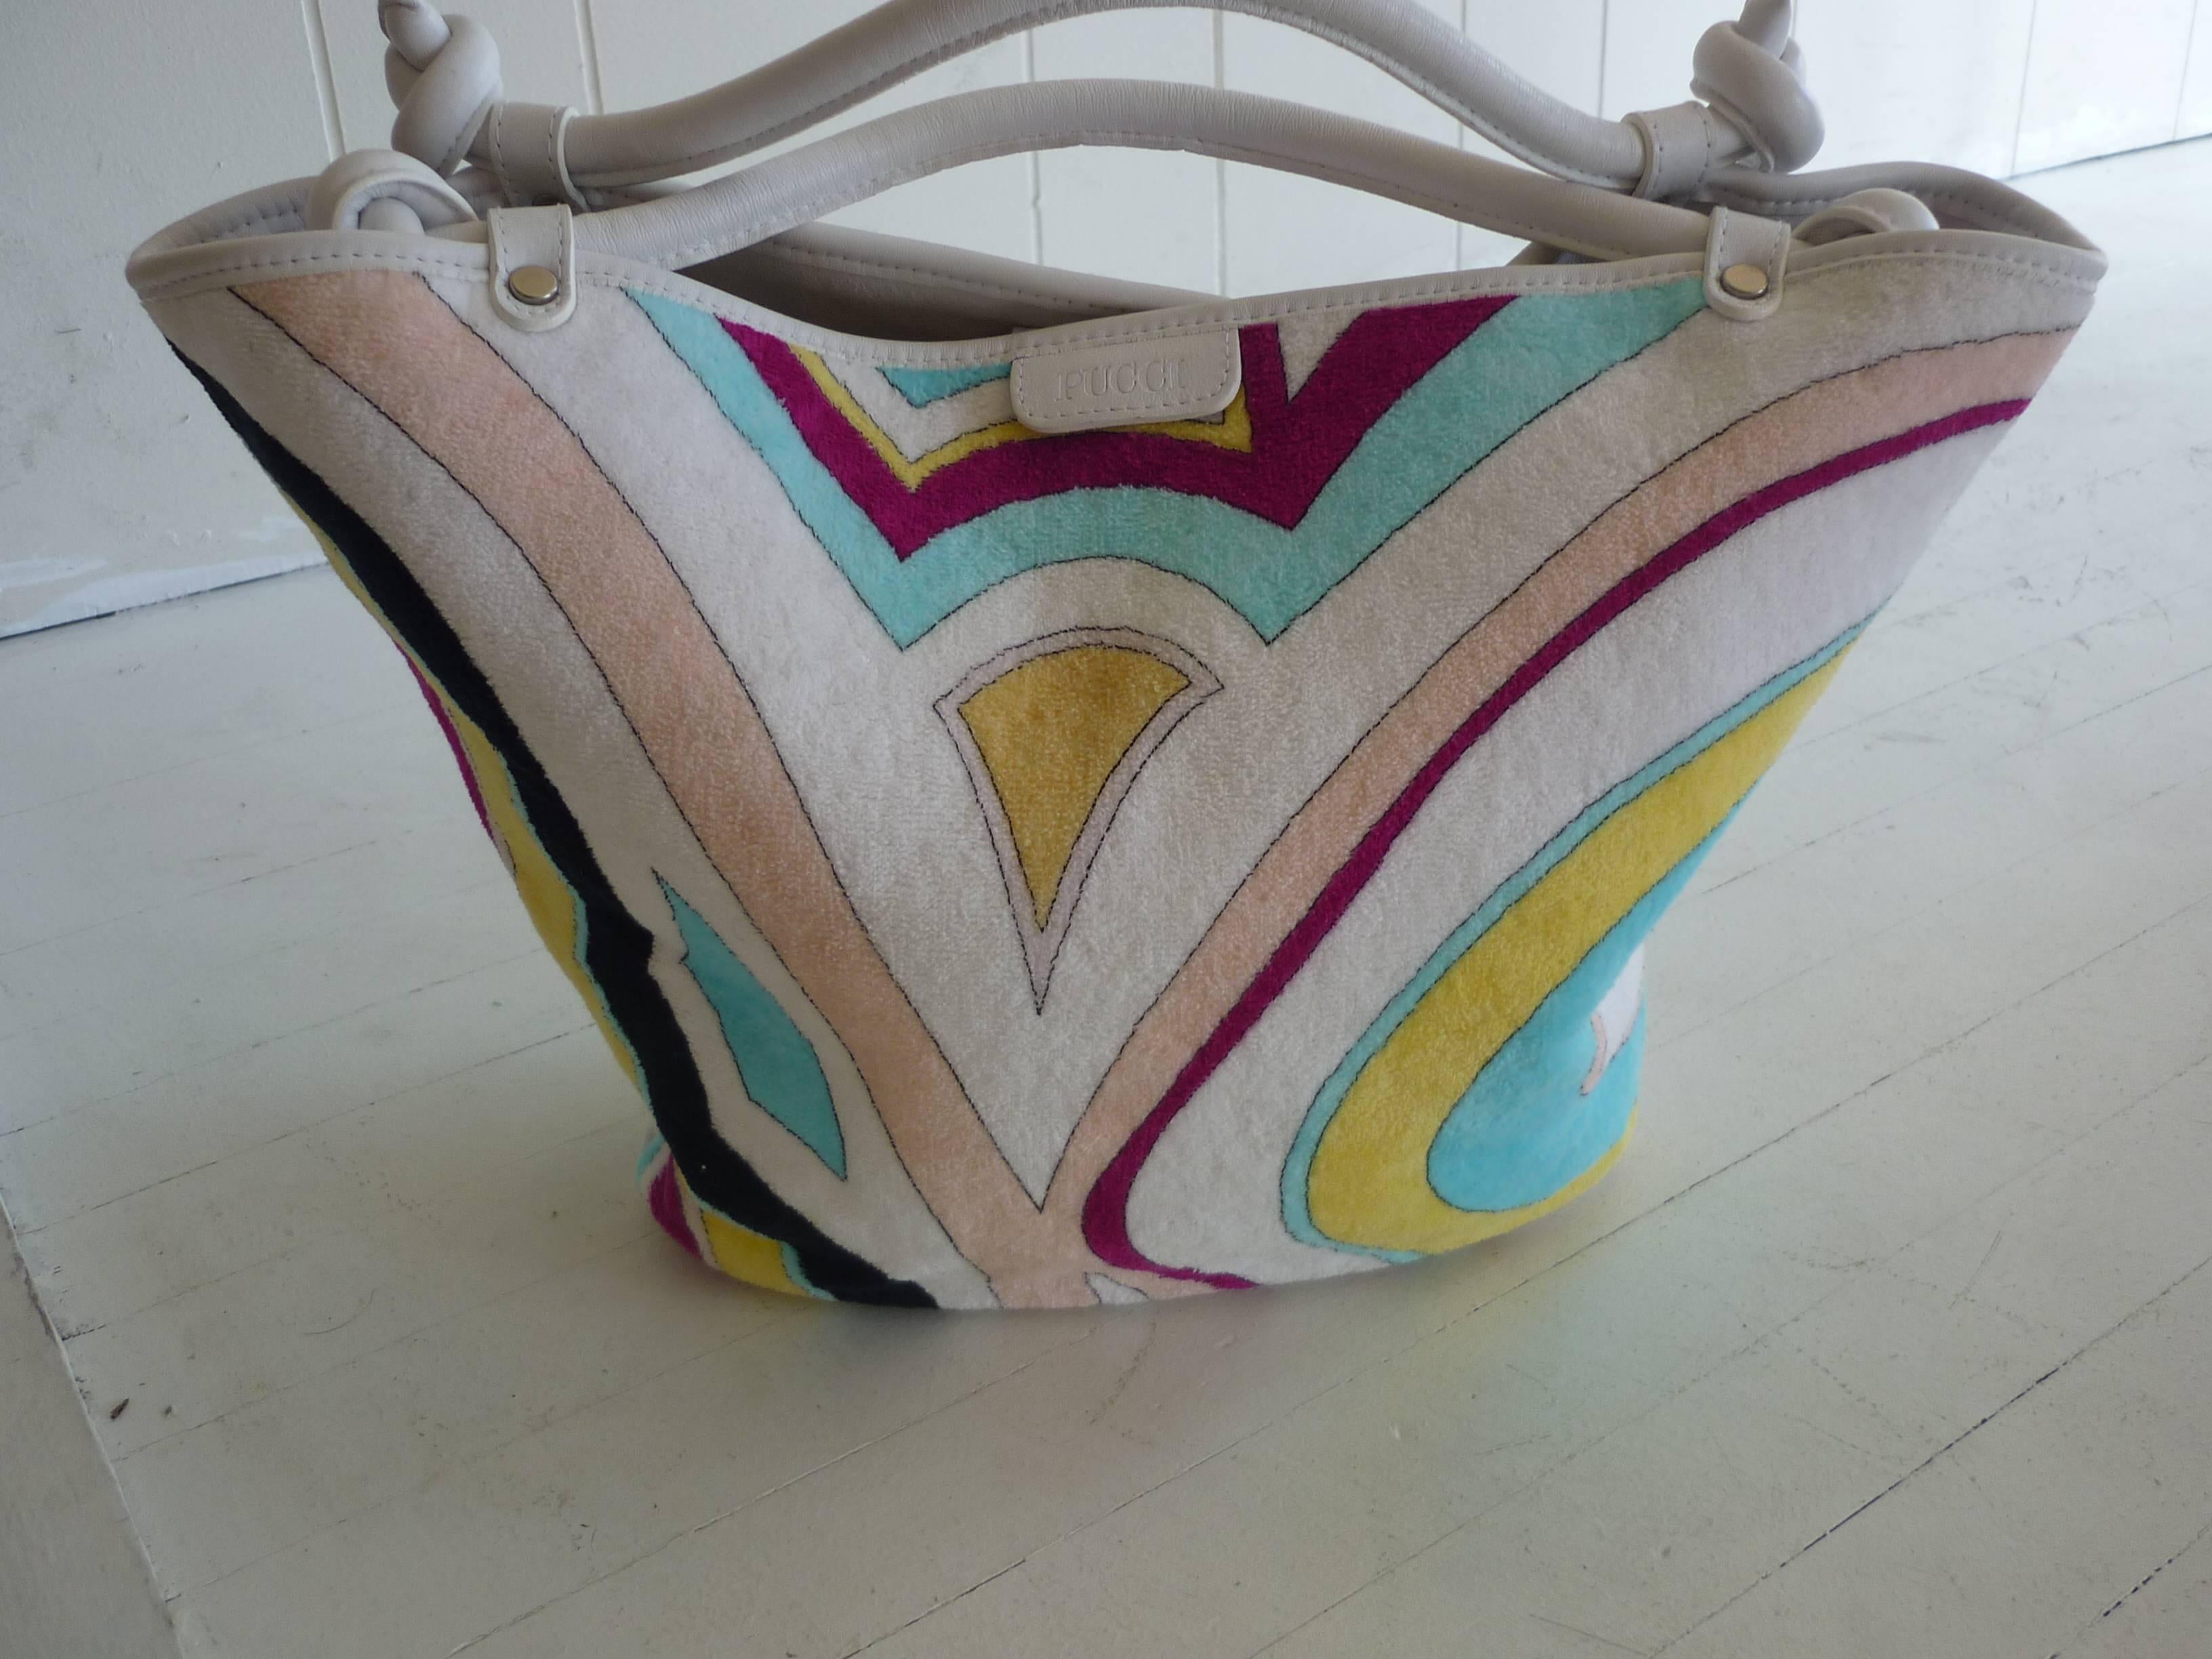 A very attractive white background and multicolor deco patterned bag which make an ideal summer and beach bag.

The bag is trimmed in white leather, including knotted straps (3 inch drop) and a white lining; there is a zipped interior pocket and